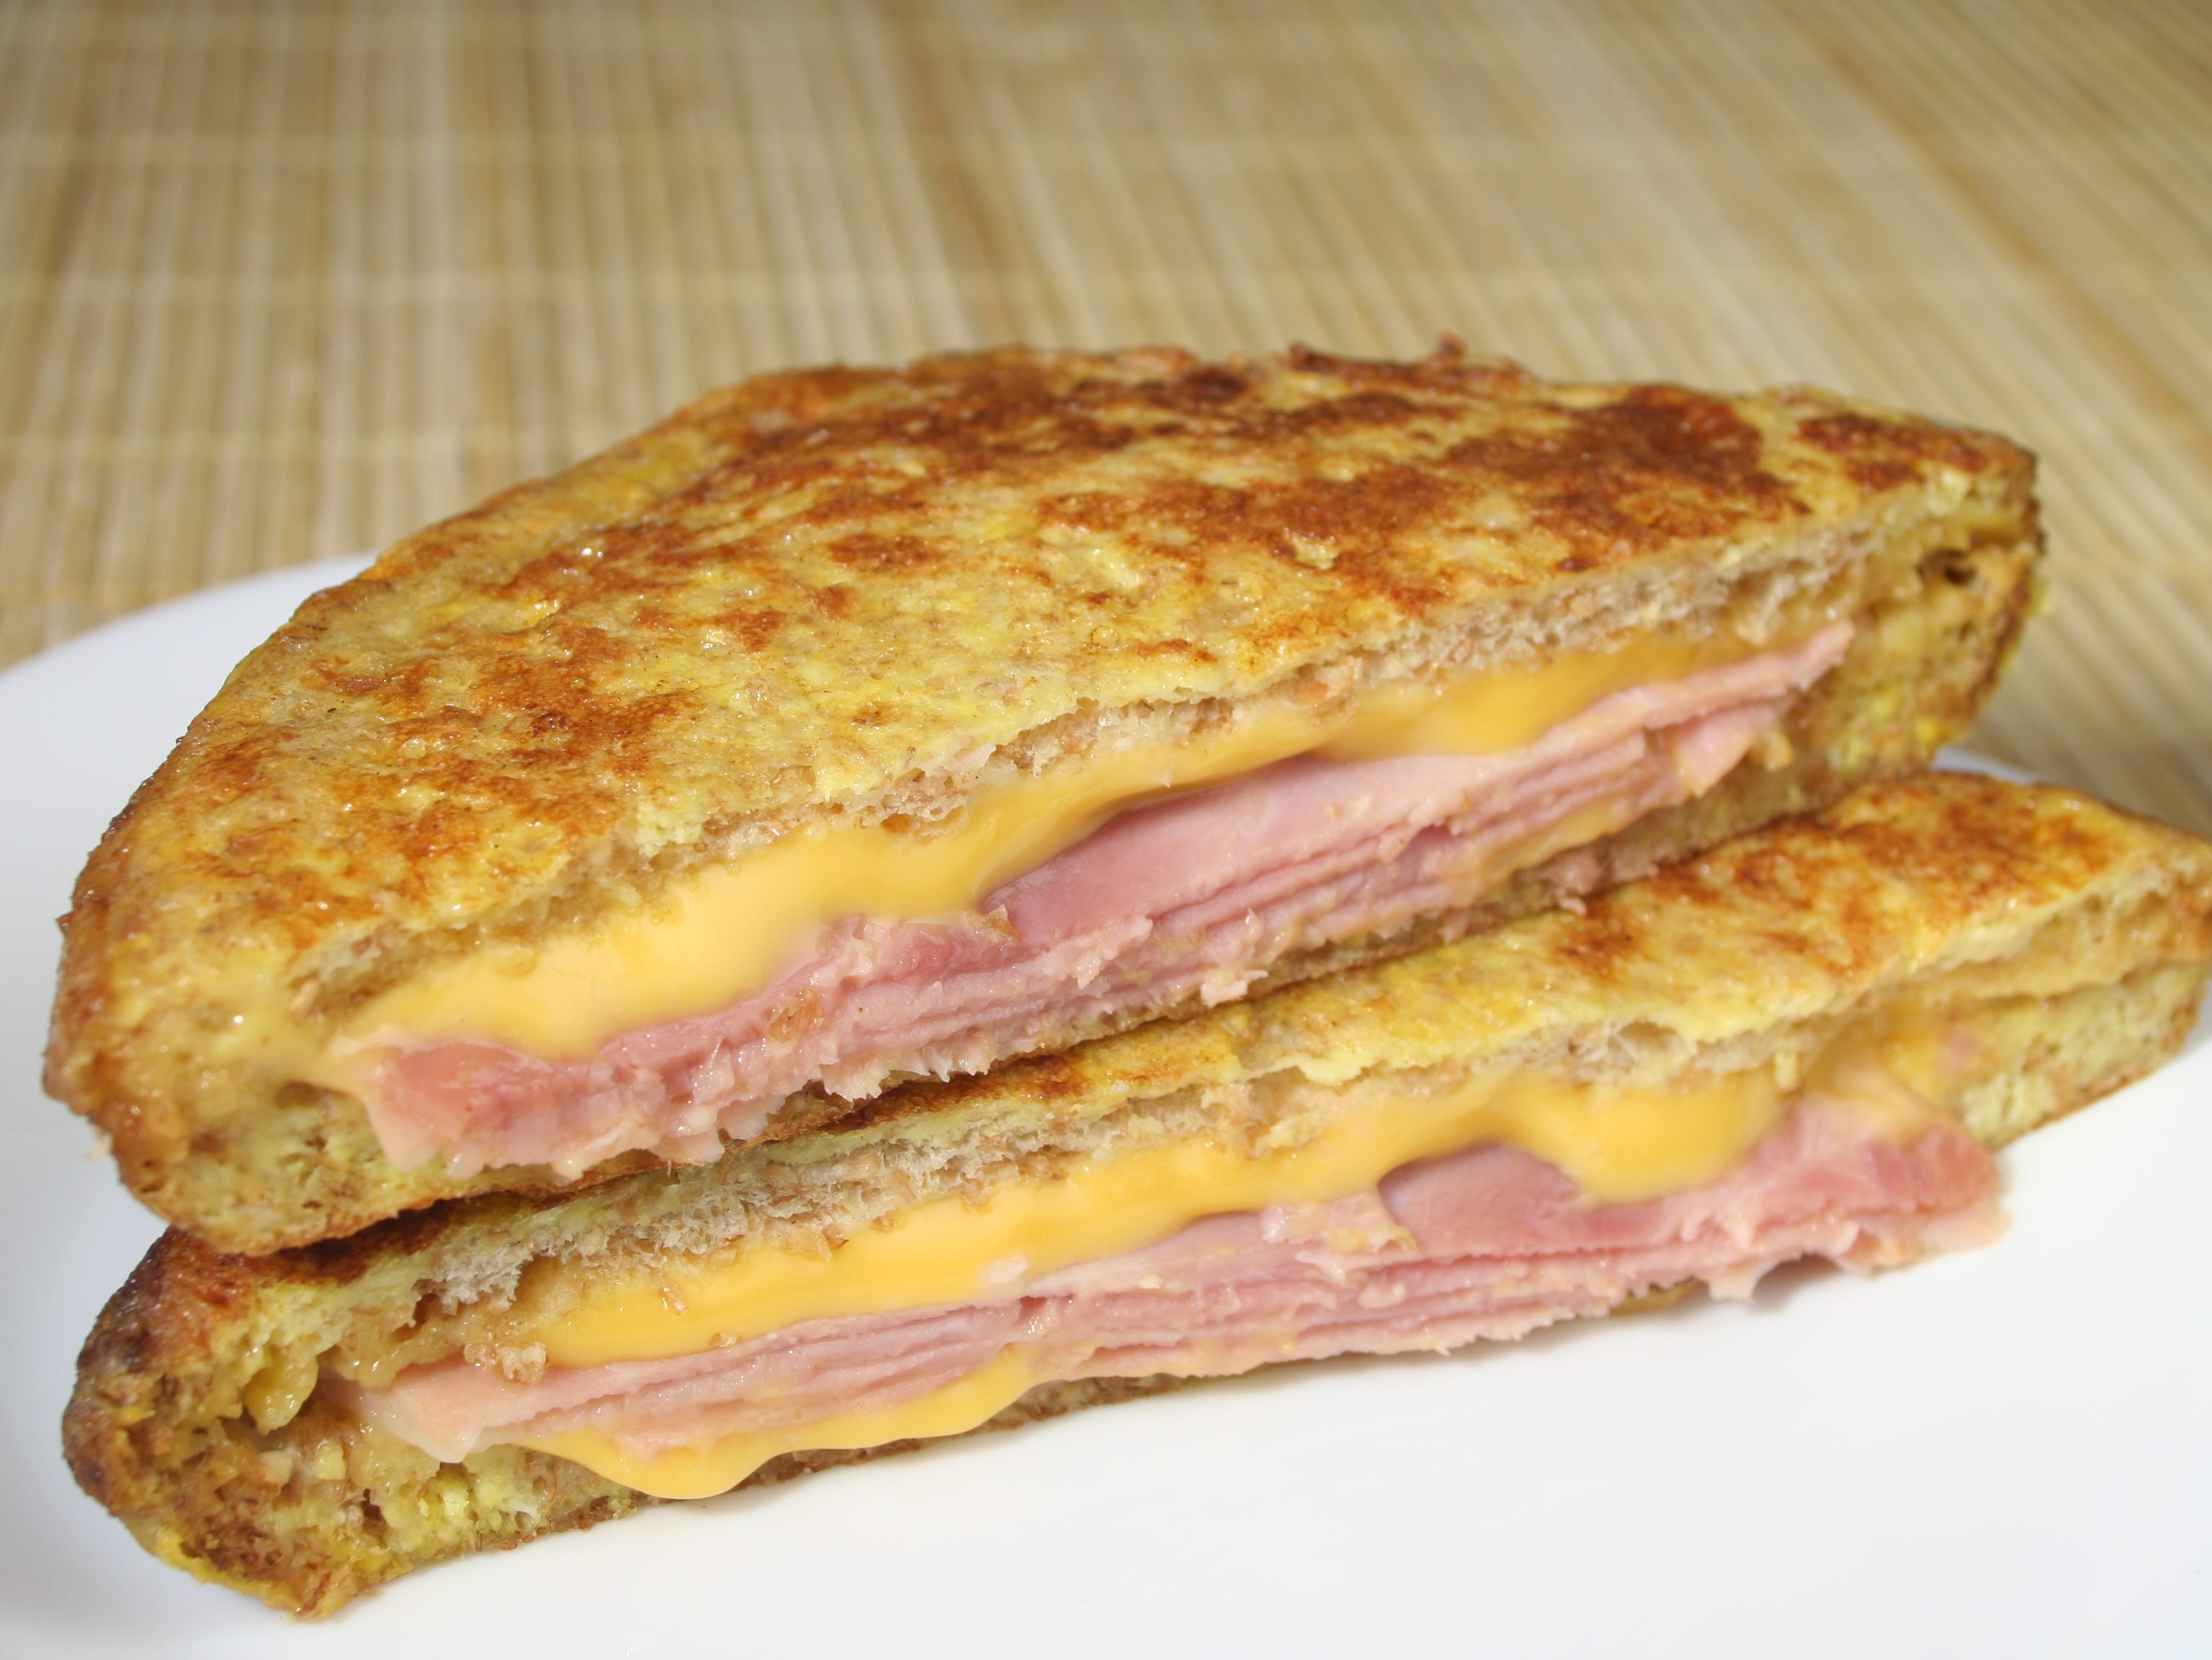 <p>One of the proudest accomplishments for this state is its delicious maple syrup. Order a fried ham and cheese Monte Cristo drizzled with it for the ultimate breakfast sammie.</p>